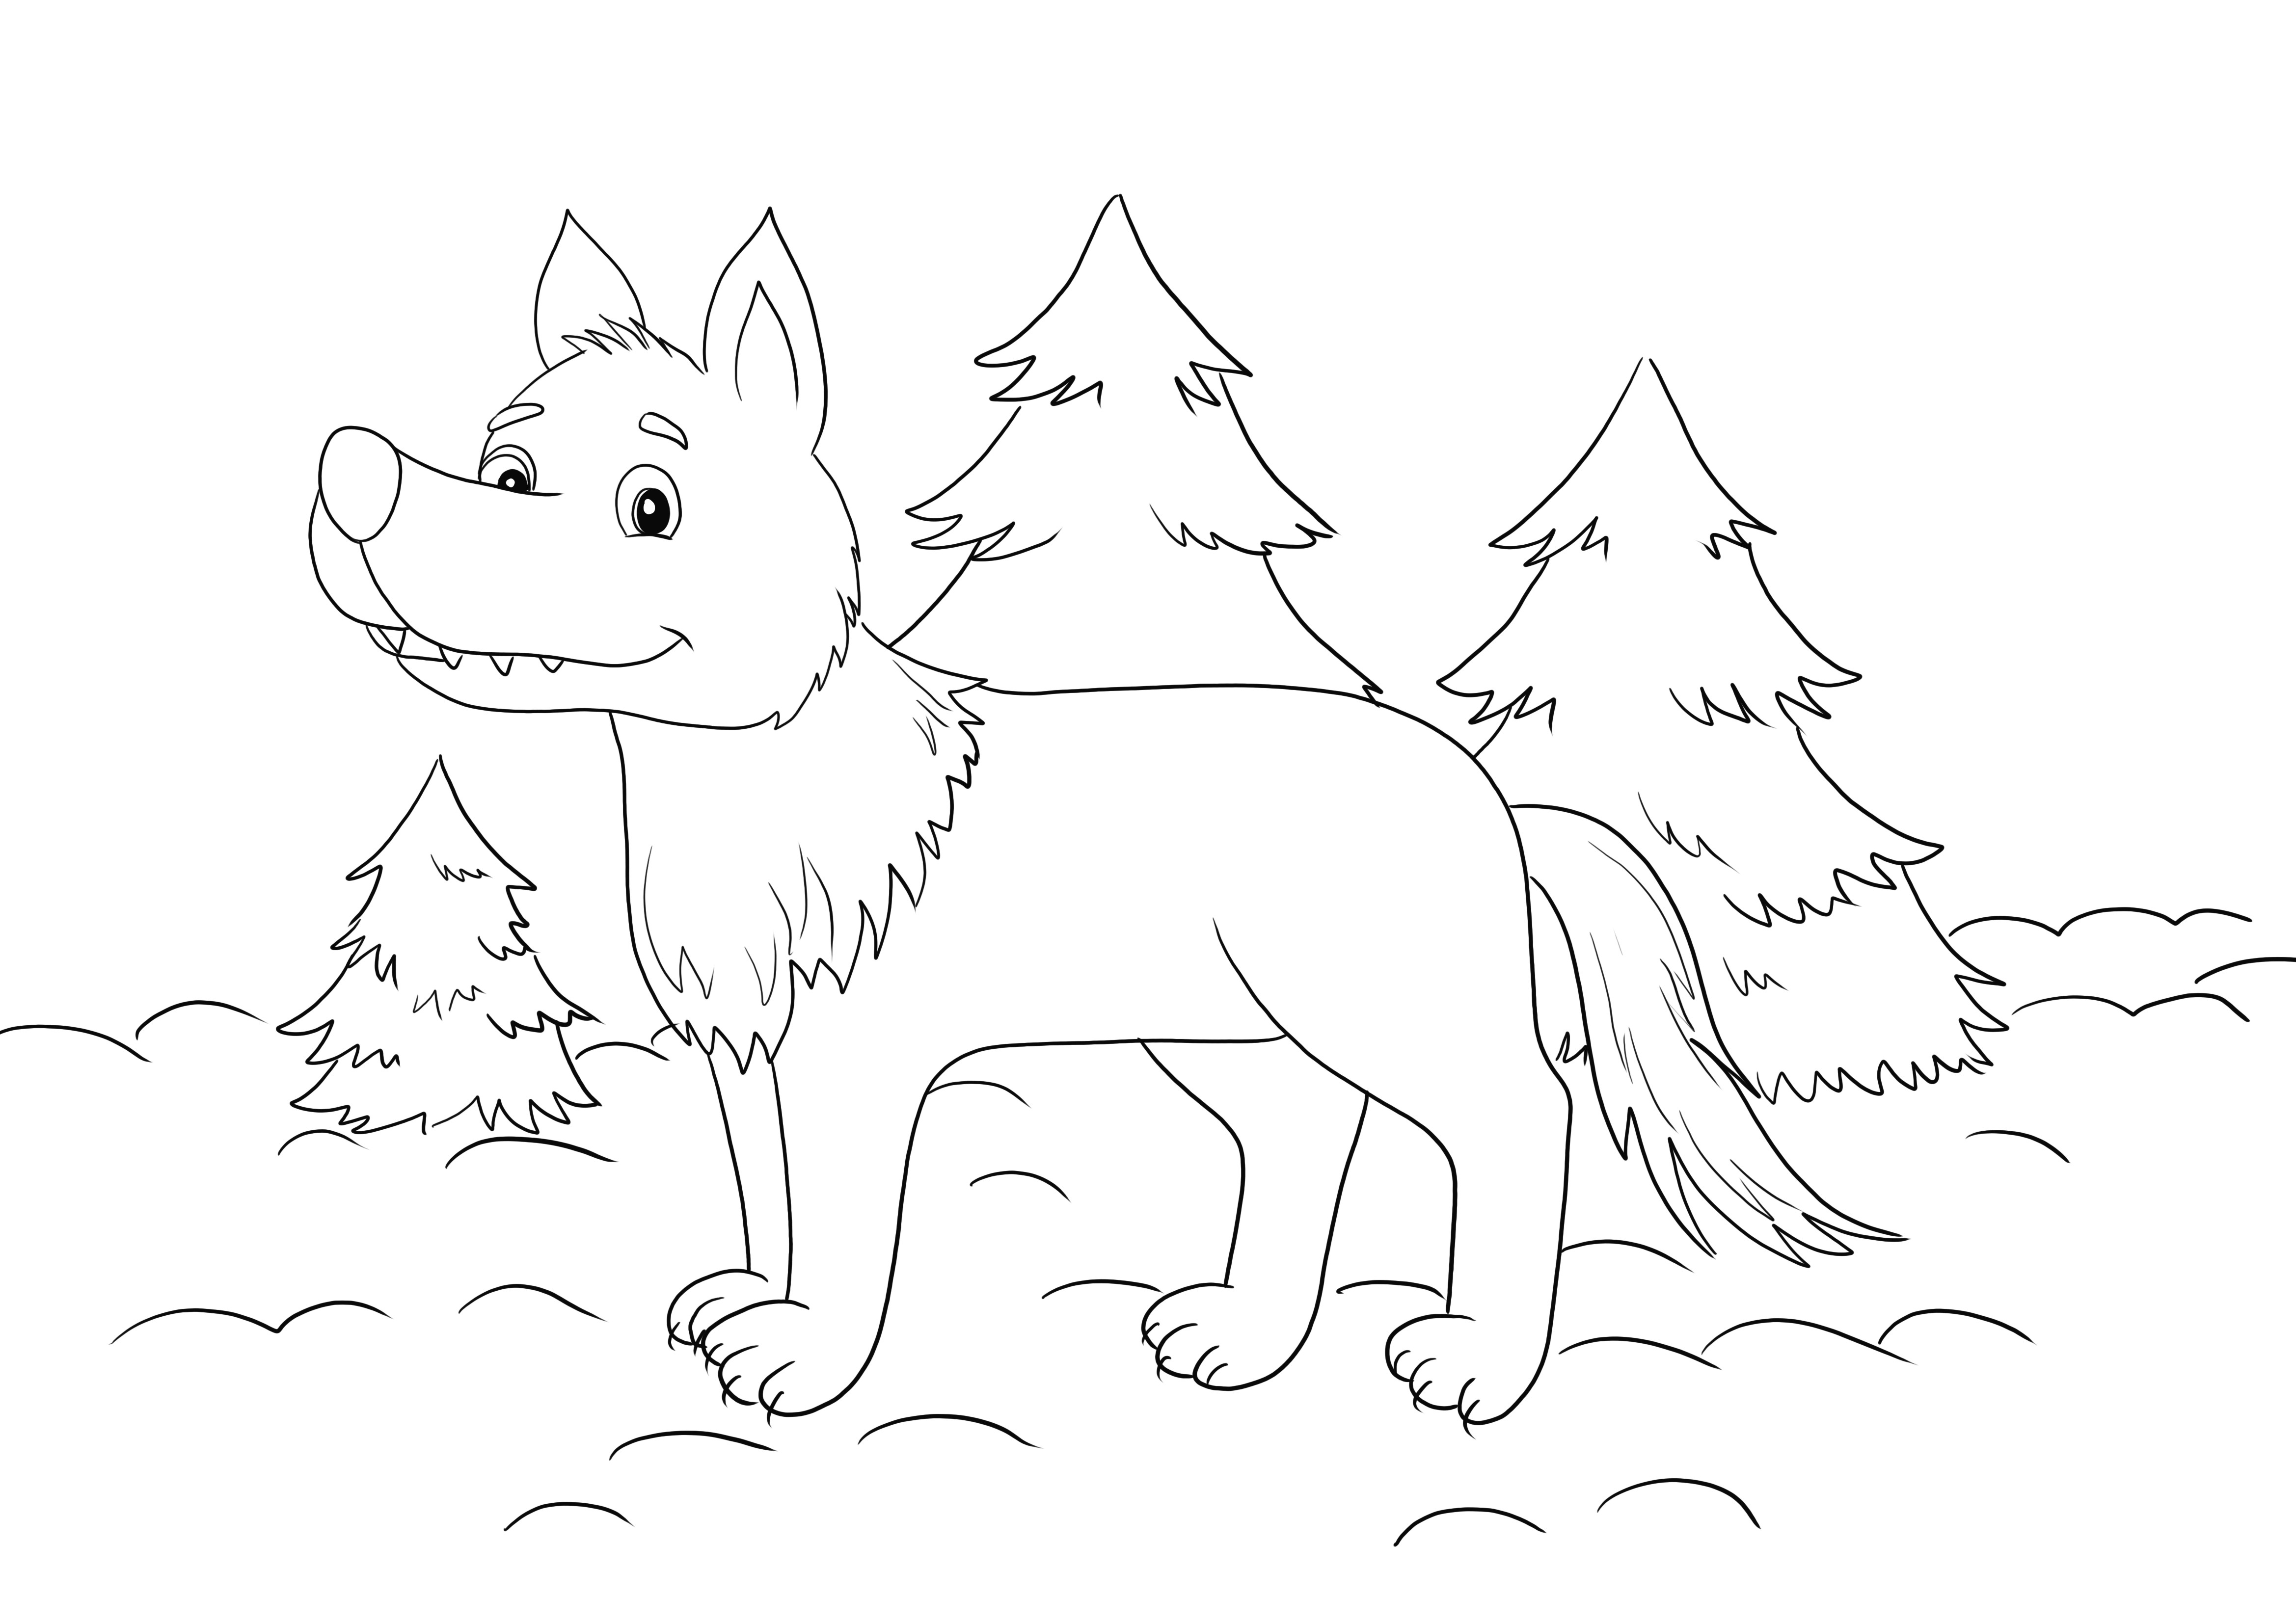 Wolf in the woods coloring and printing free for children to learn about wolves